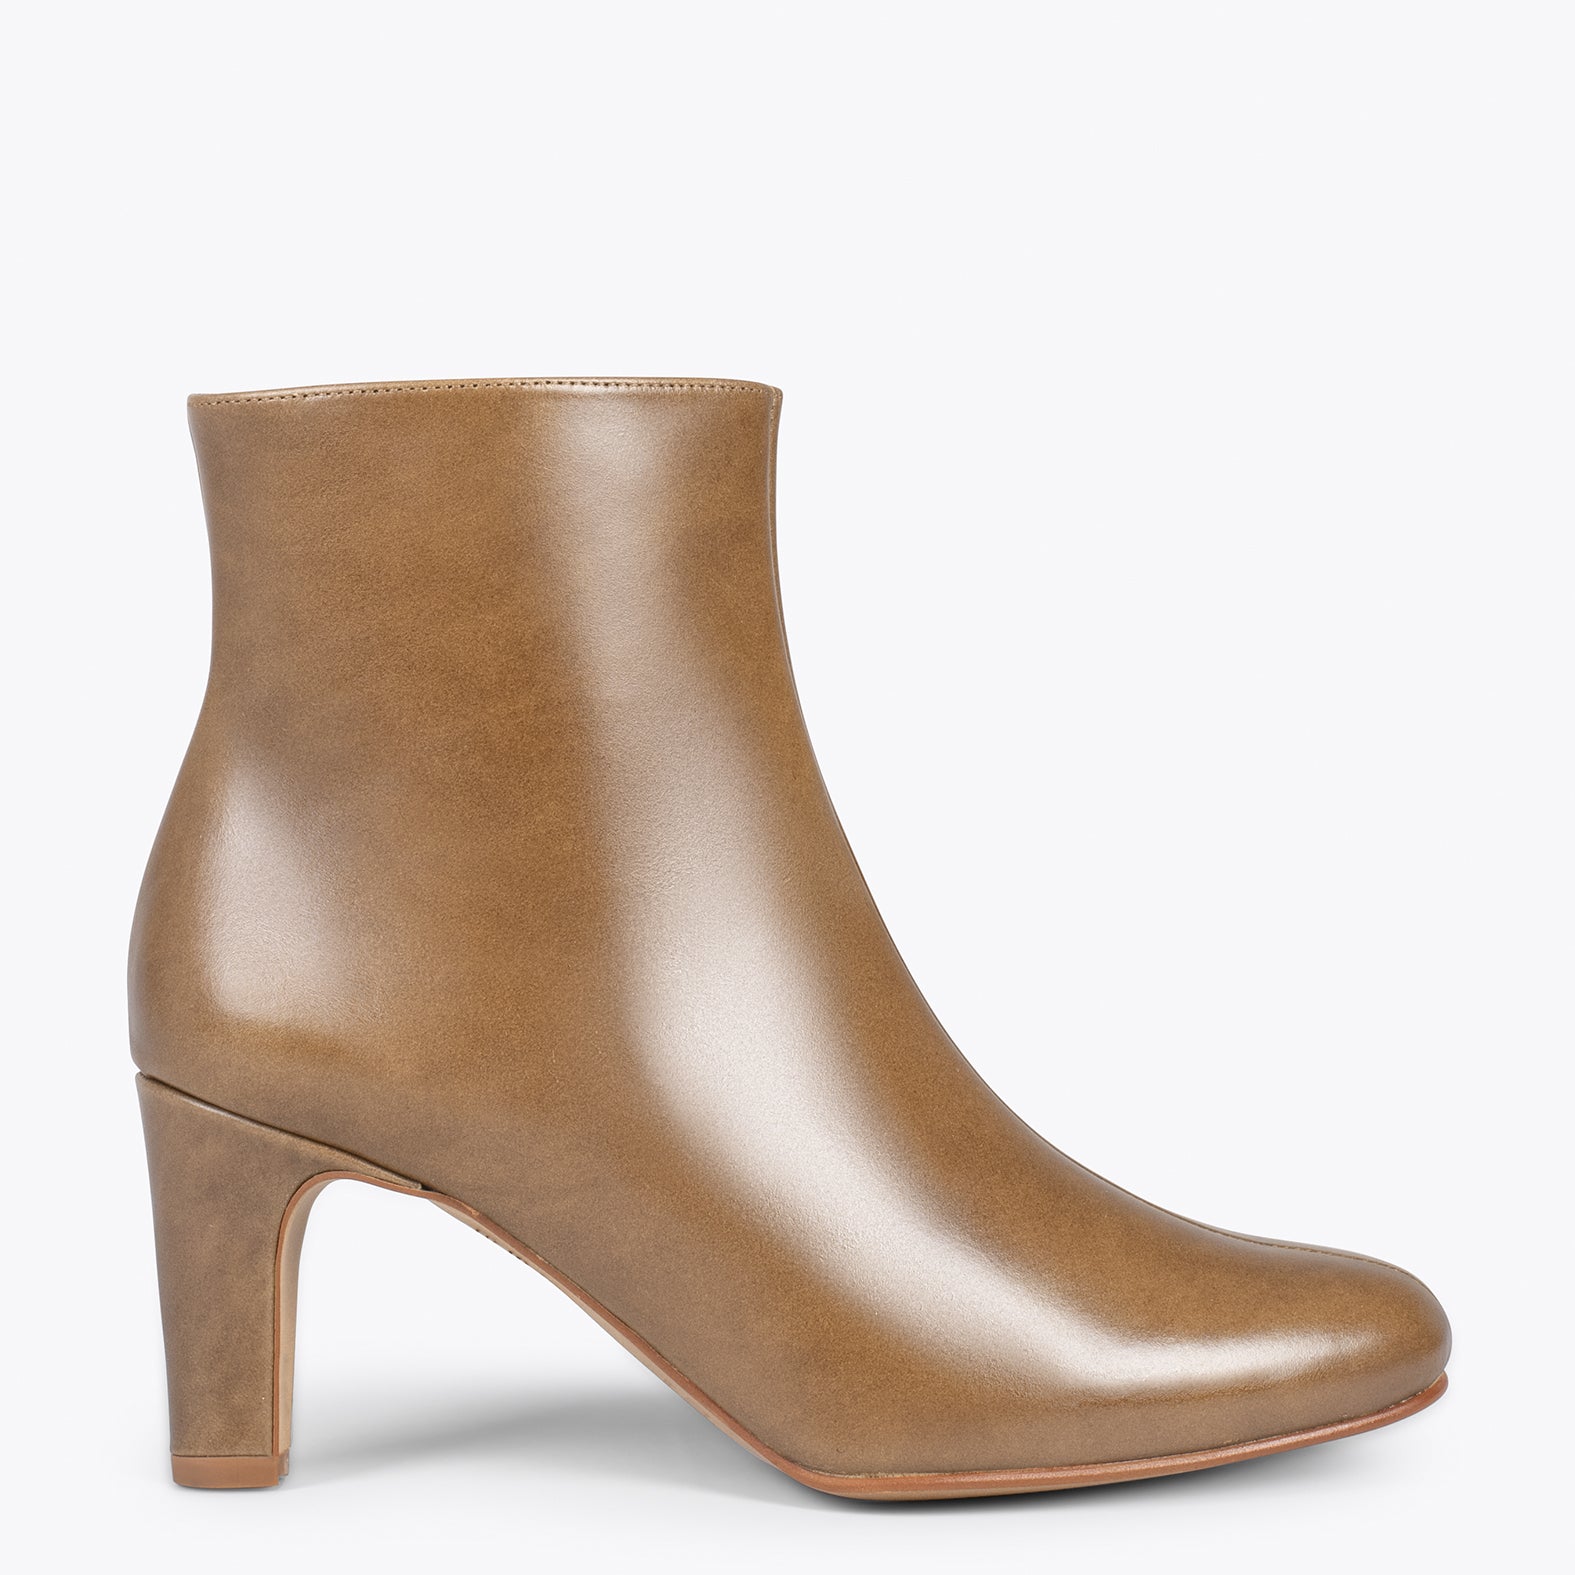 DAILY – TAUPE leather bootie